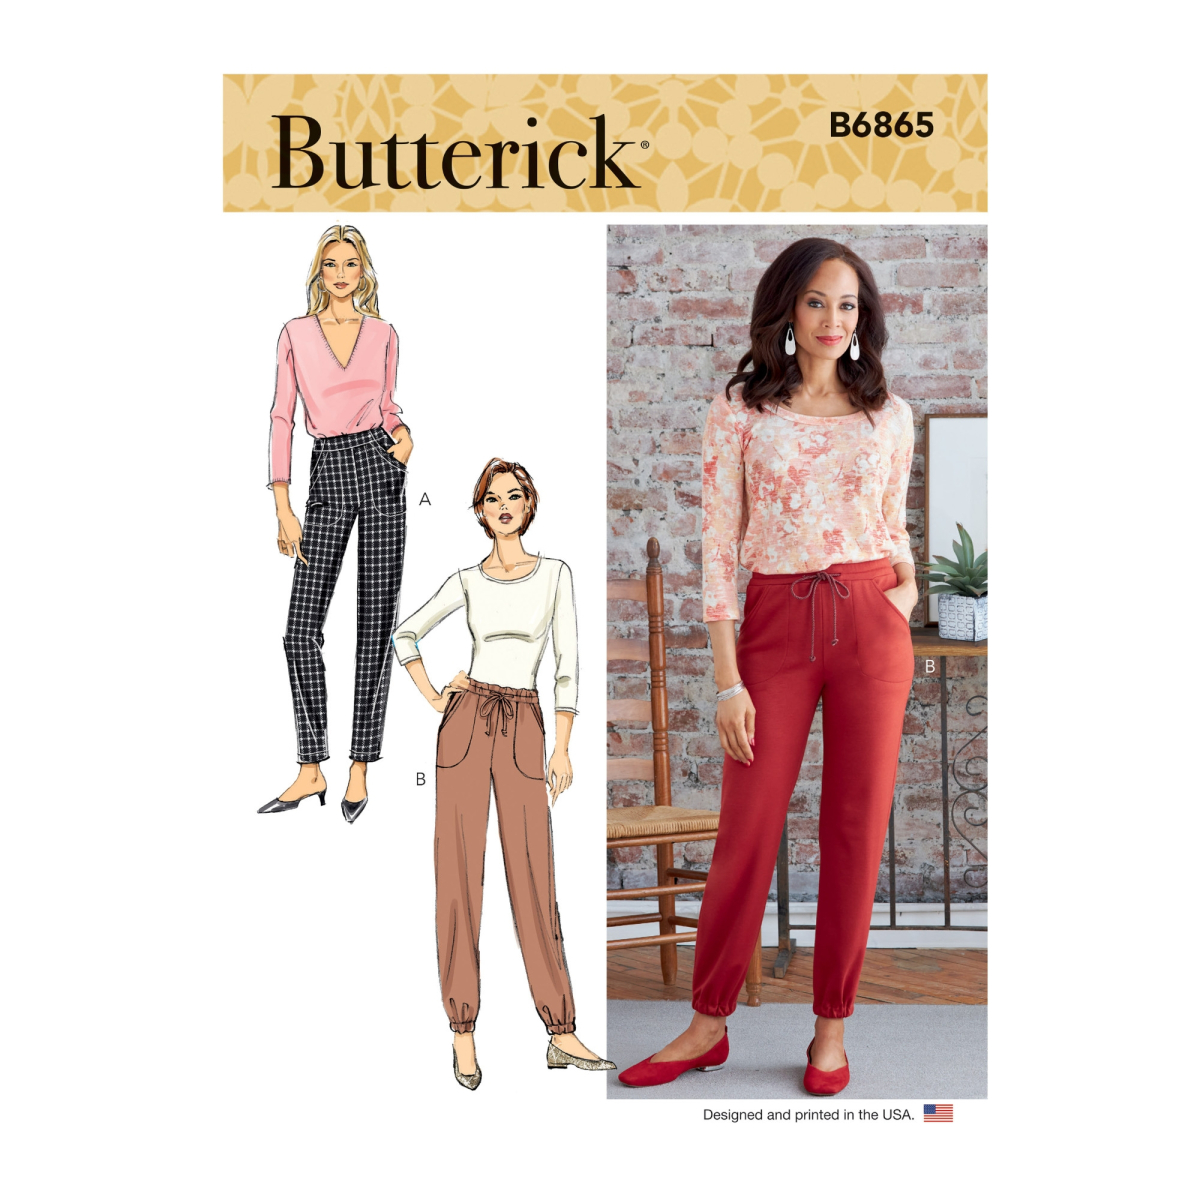 Sewing Wide Legged Pants| Butterick 6715 Pattern Walk-Through | How to Sew  a Trousers..with a cuff! - YouTube